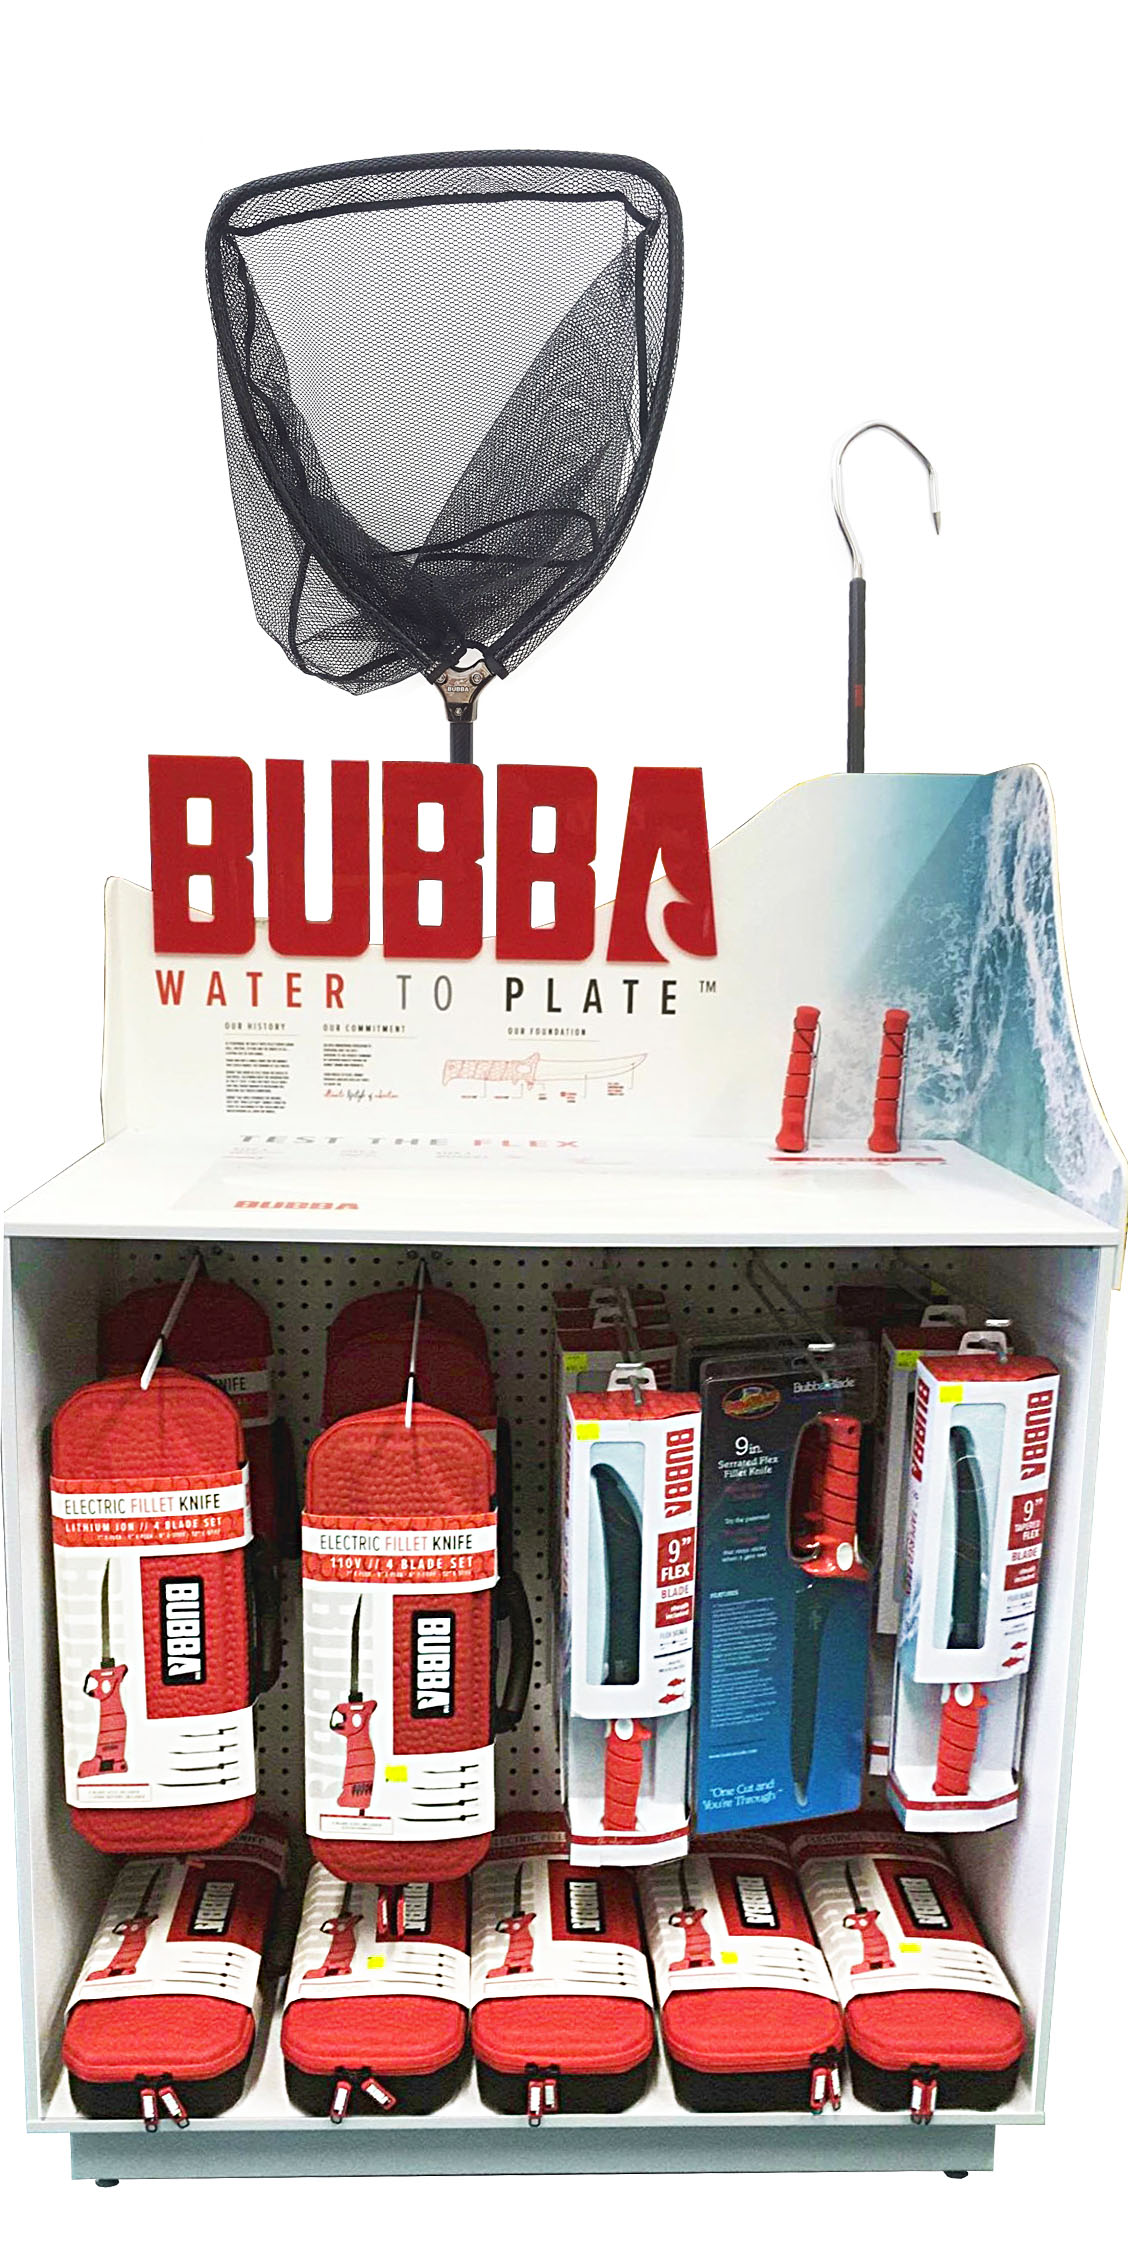 BUBBA Captures Sport Fishing Lifestyle with Latest Merchandising